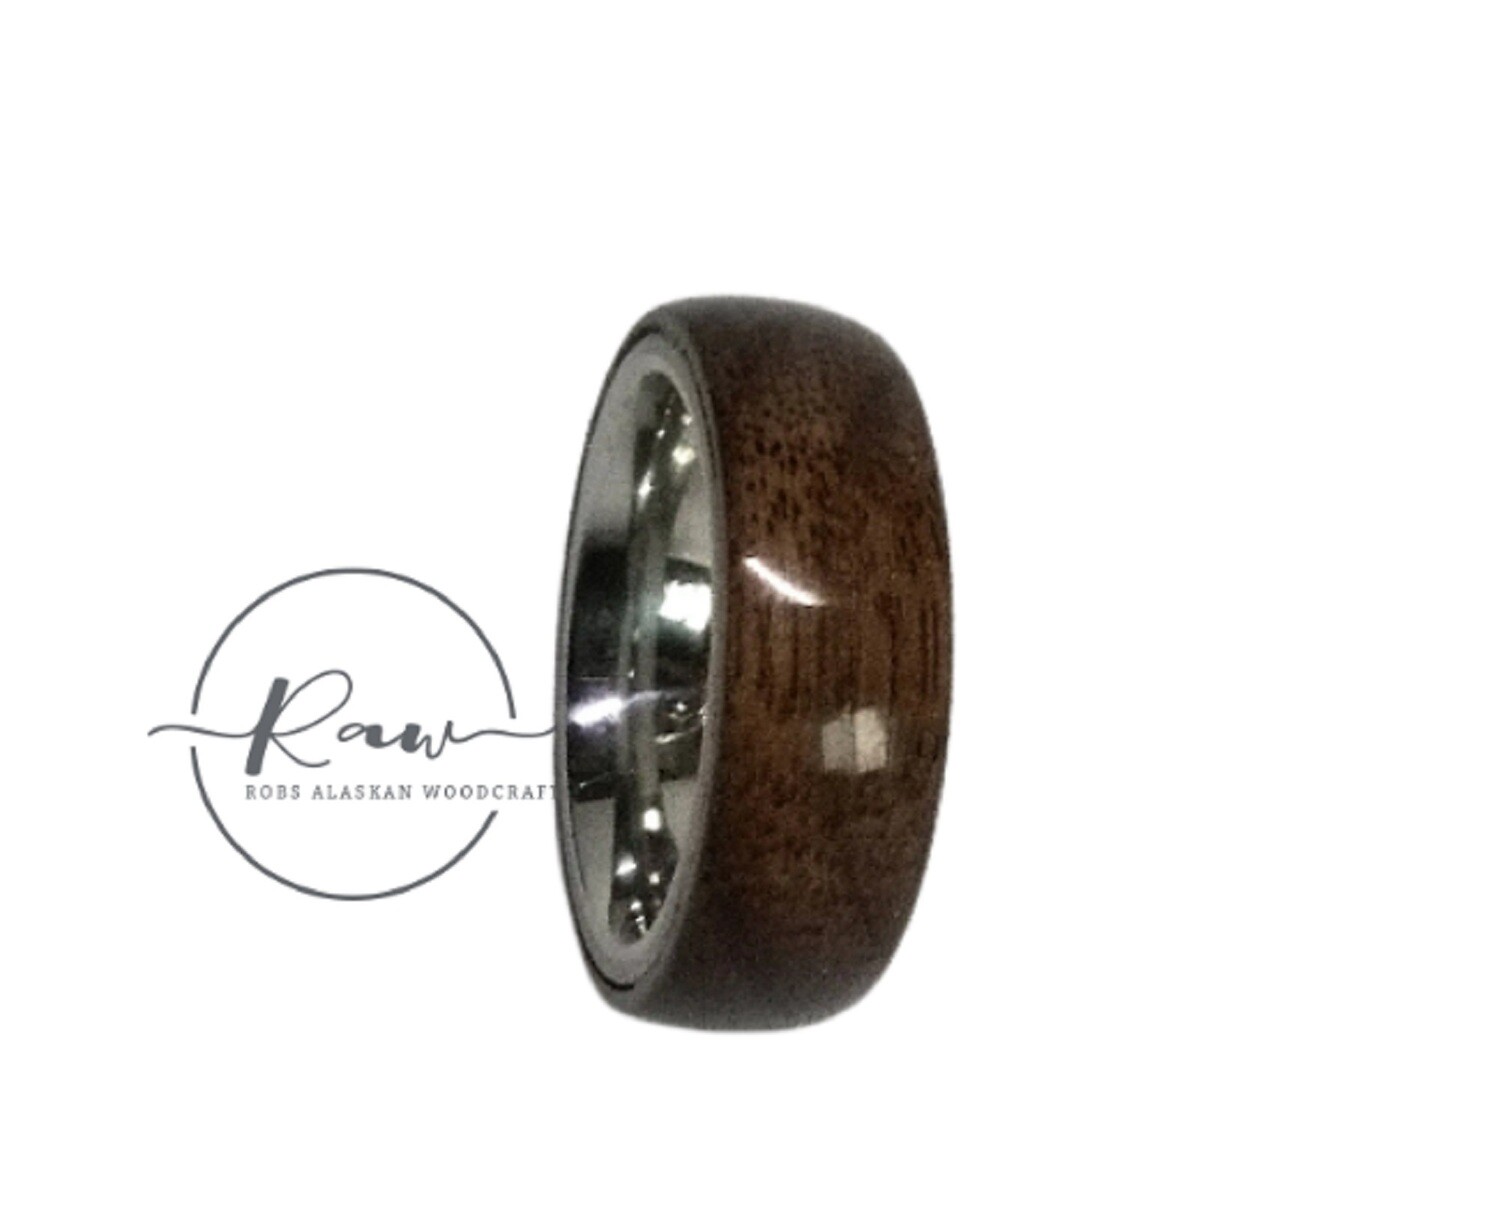 Black Walnut and Stainless Steel Bent Wood ring